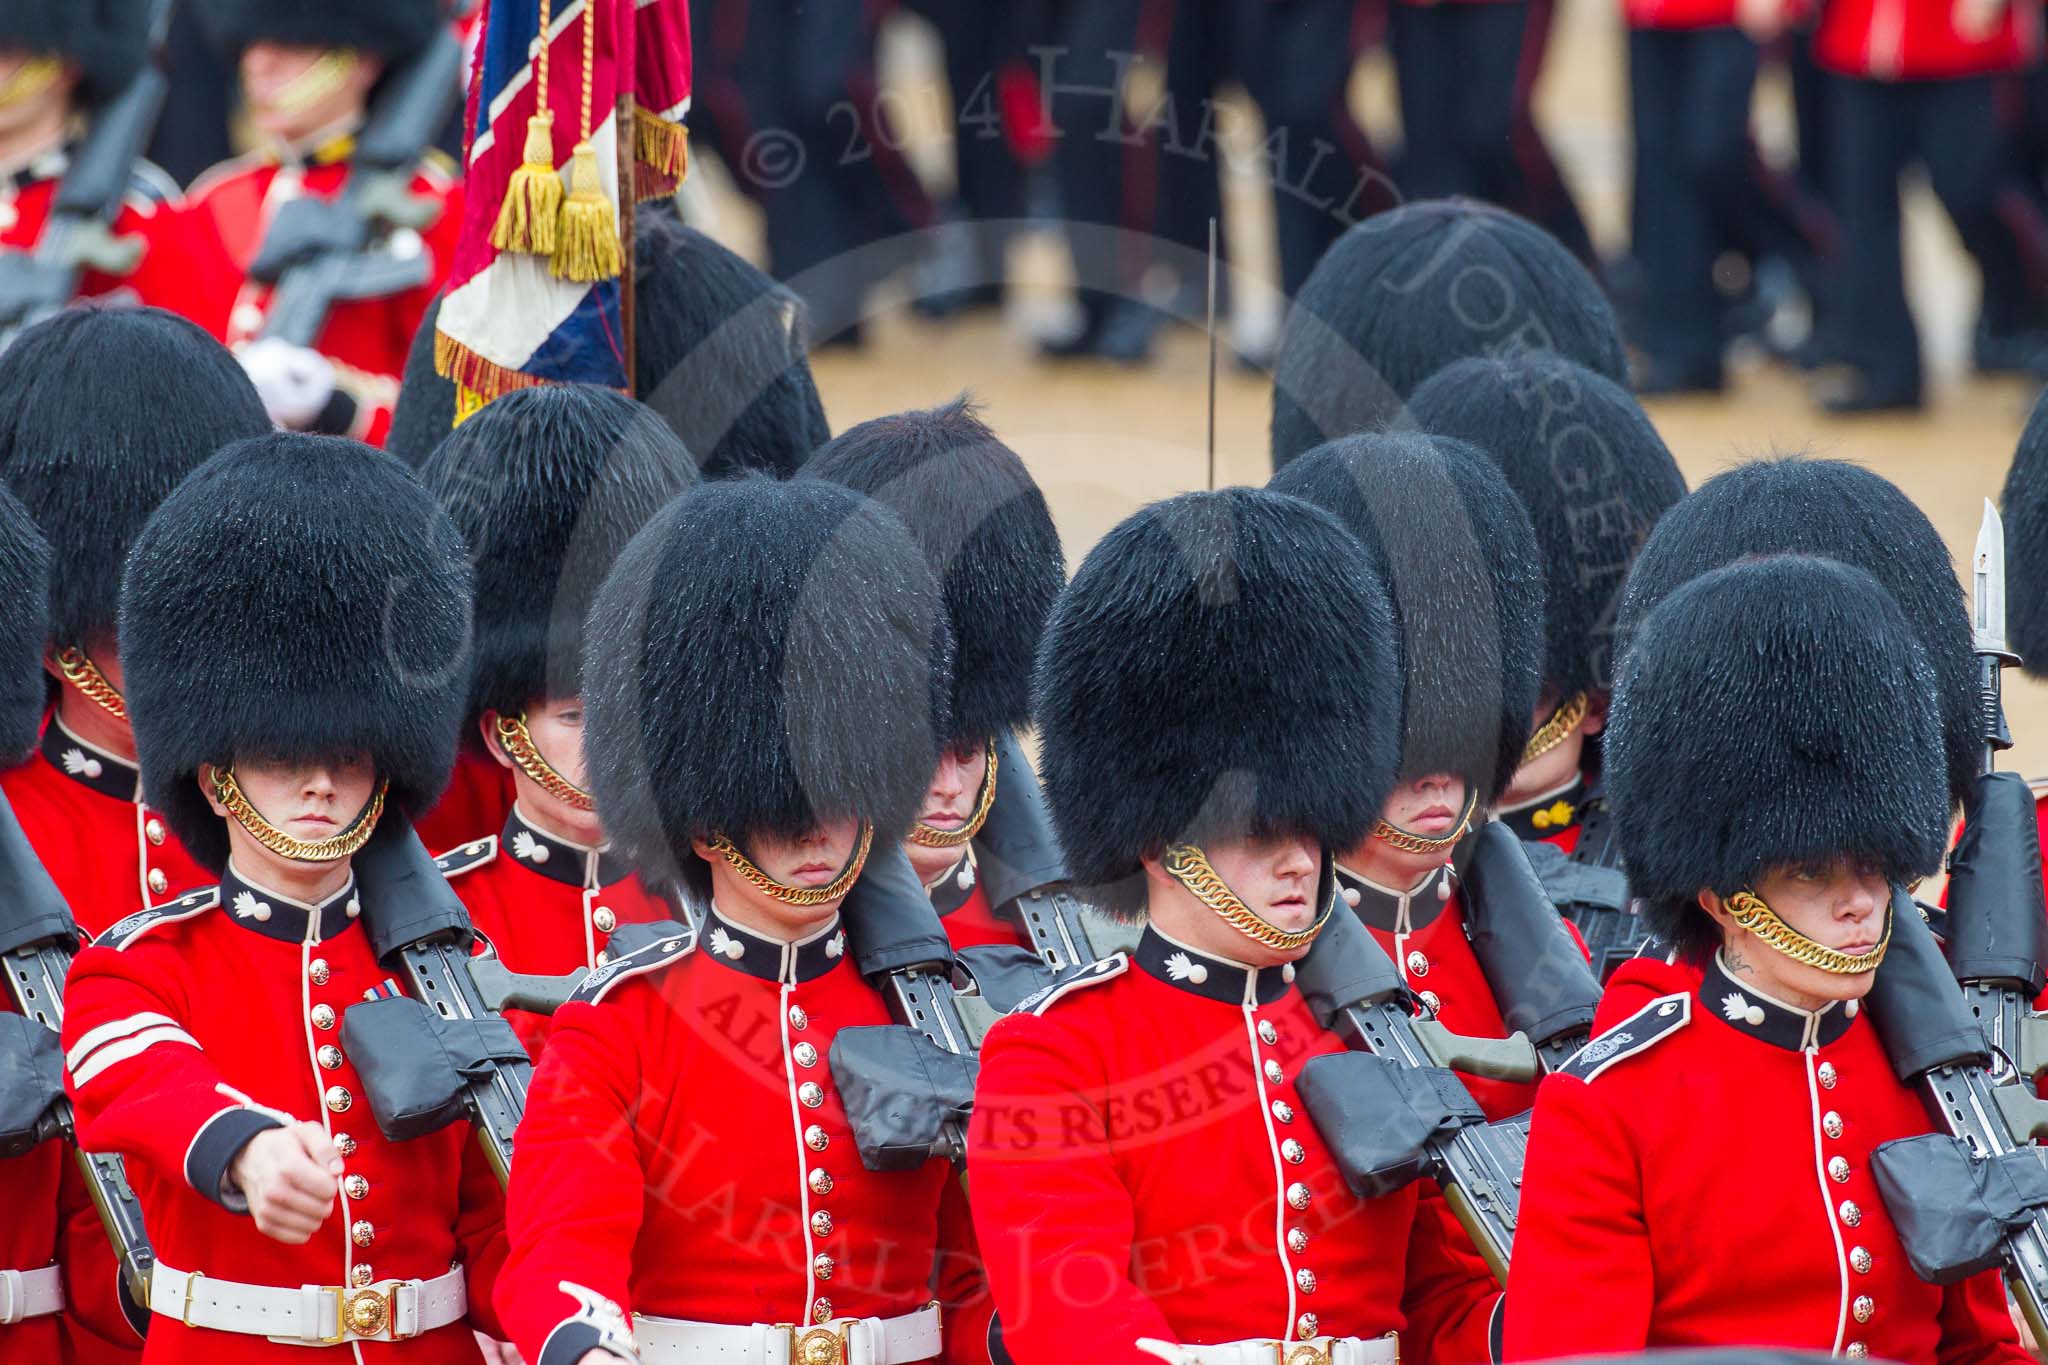 The Colonel's Review 2014.
Horse Guards Parade, Westminster,
London,

United Kingdom,
on 07 June 2014 at 11:43, image #546